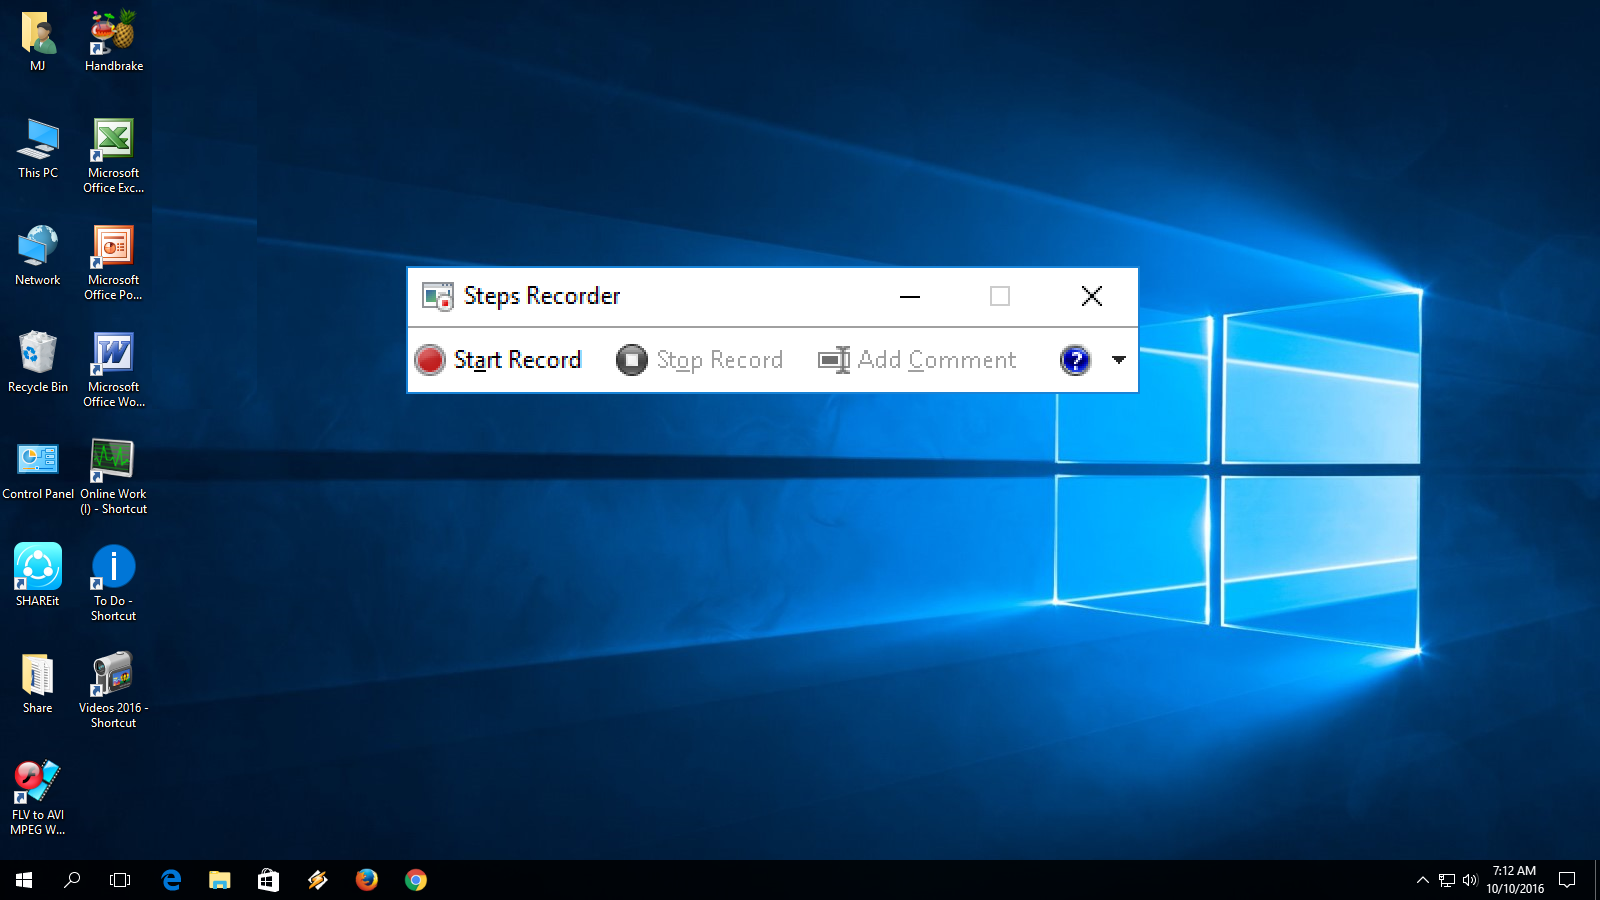 Learn New Things: Hidden Steps Recorder of Windows